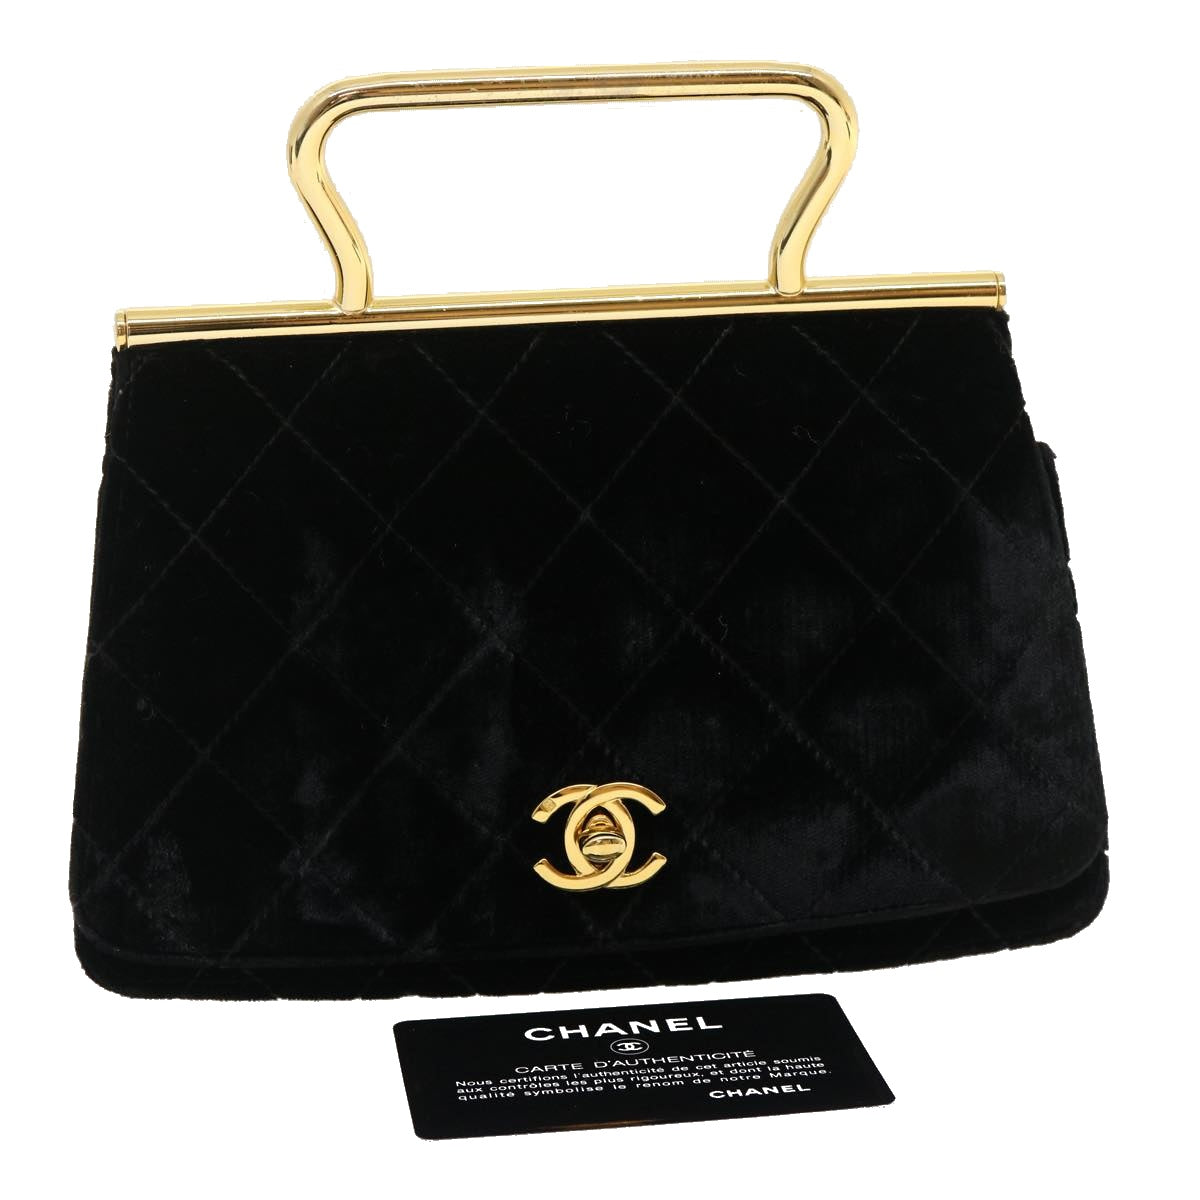 chanel lady pearly flap bag